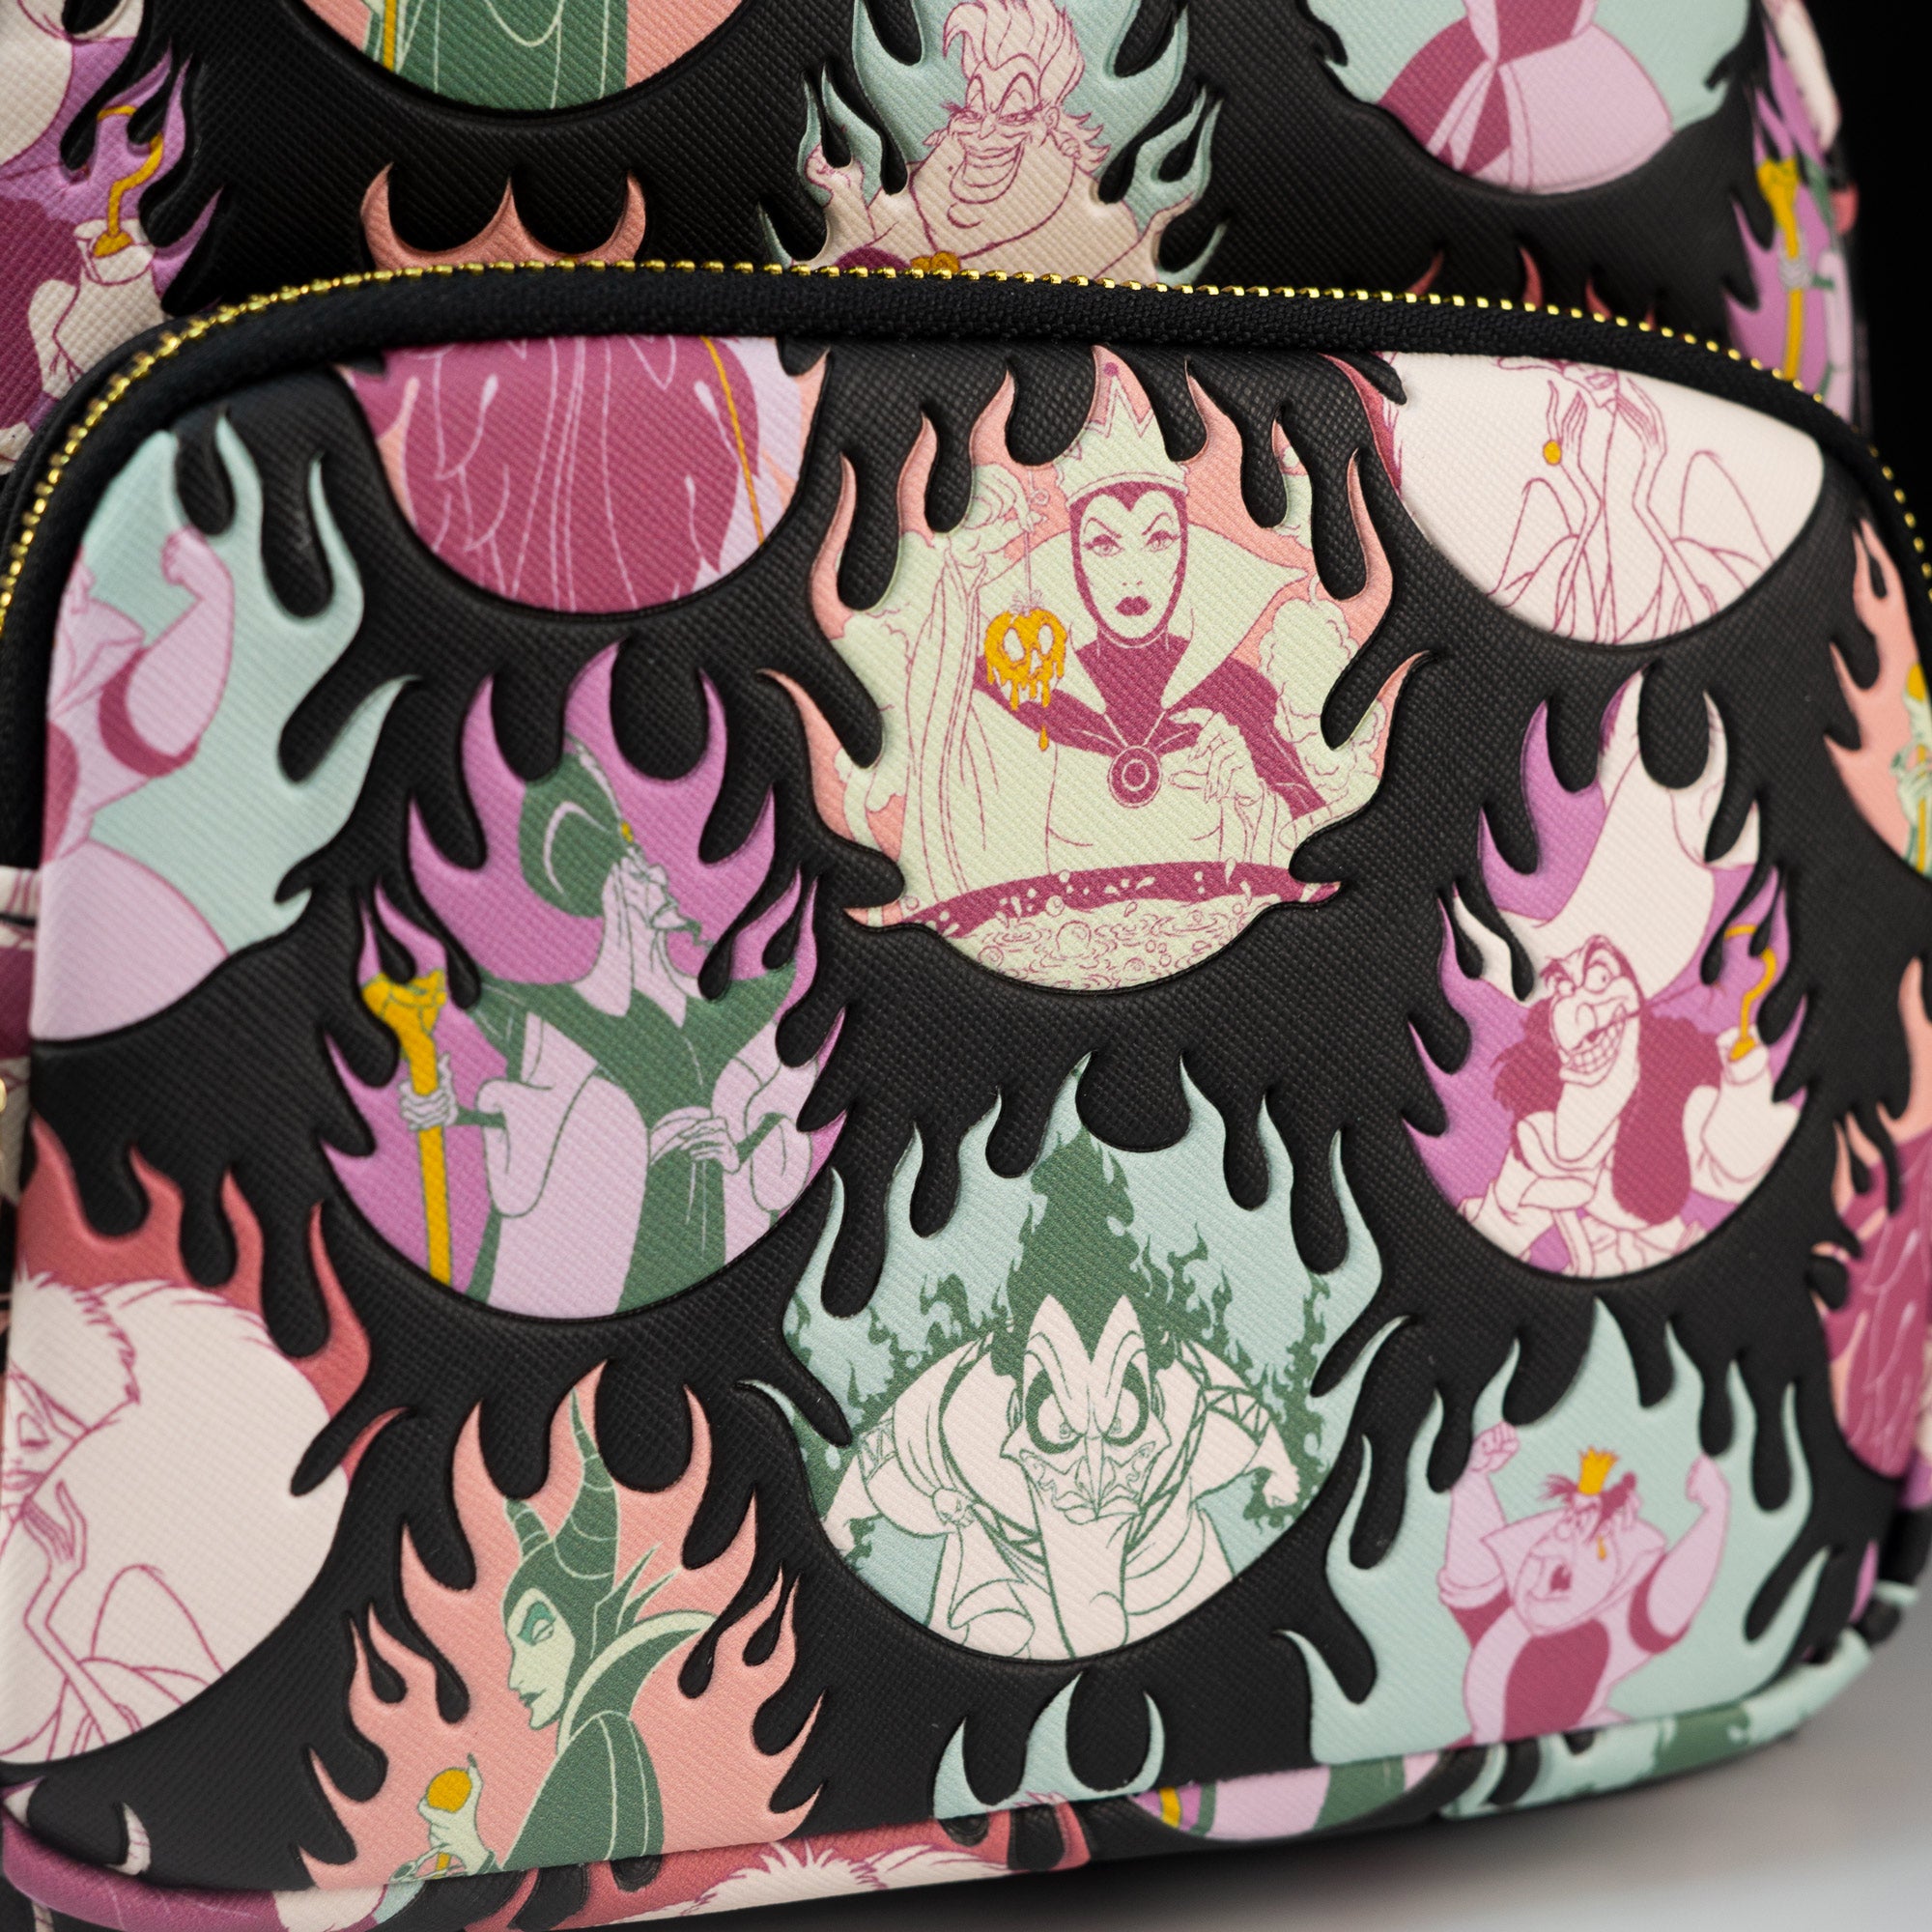 Loungefly x Disney Villains Pastel Flames Mini Backpack